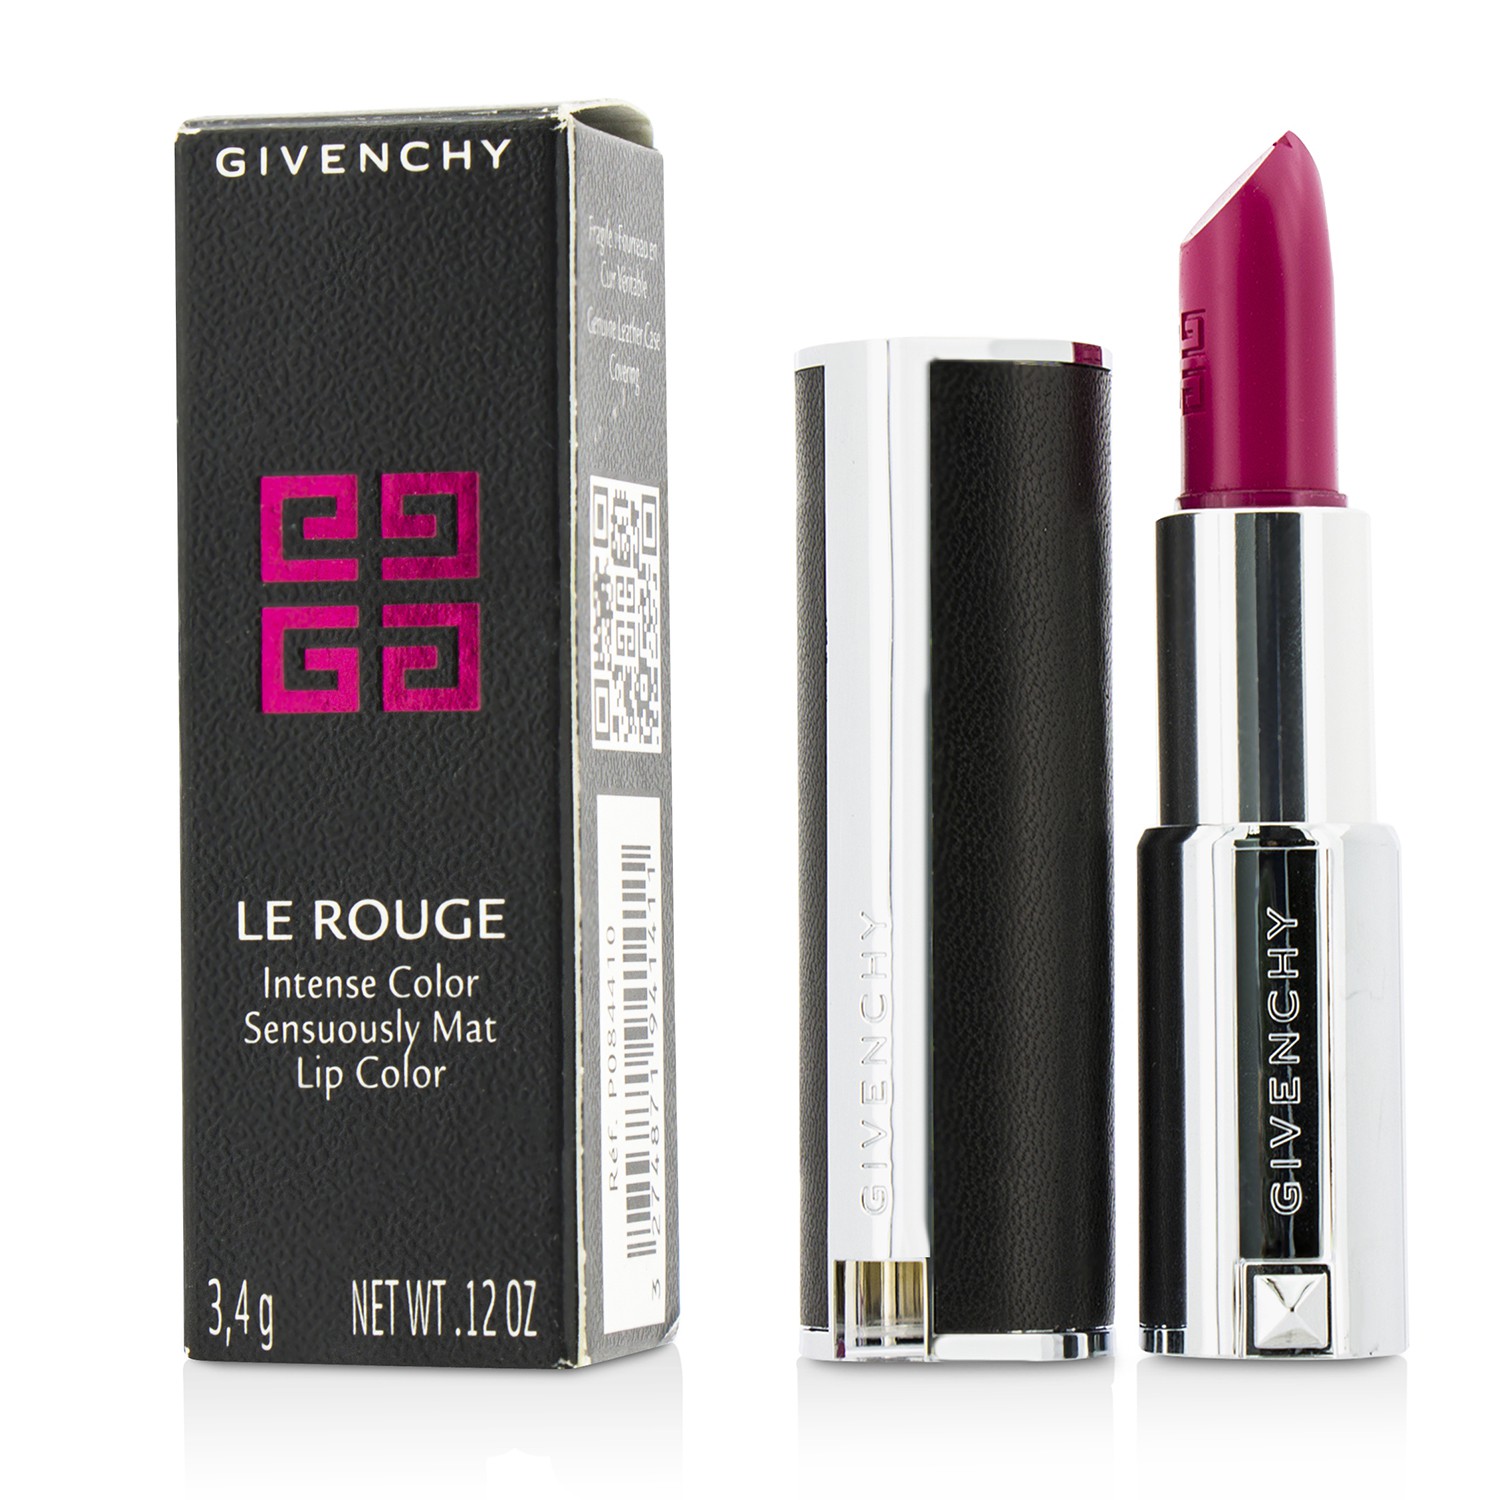 Le Rouge Intense Color Sensuously Mat Lipstick - # 205 Fuchsia Irresistible Givenchy Image